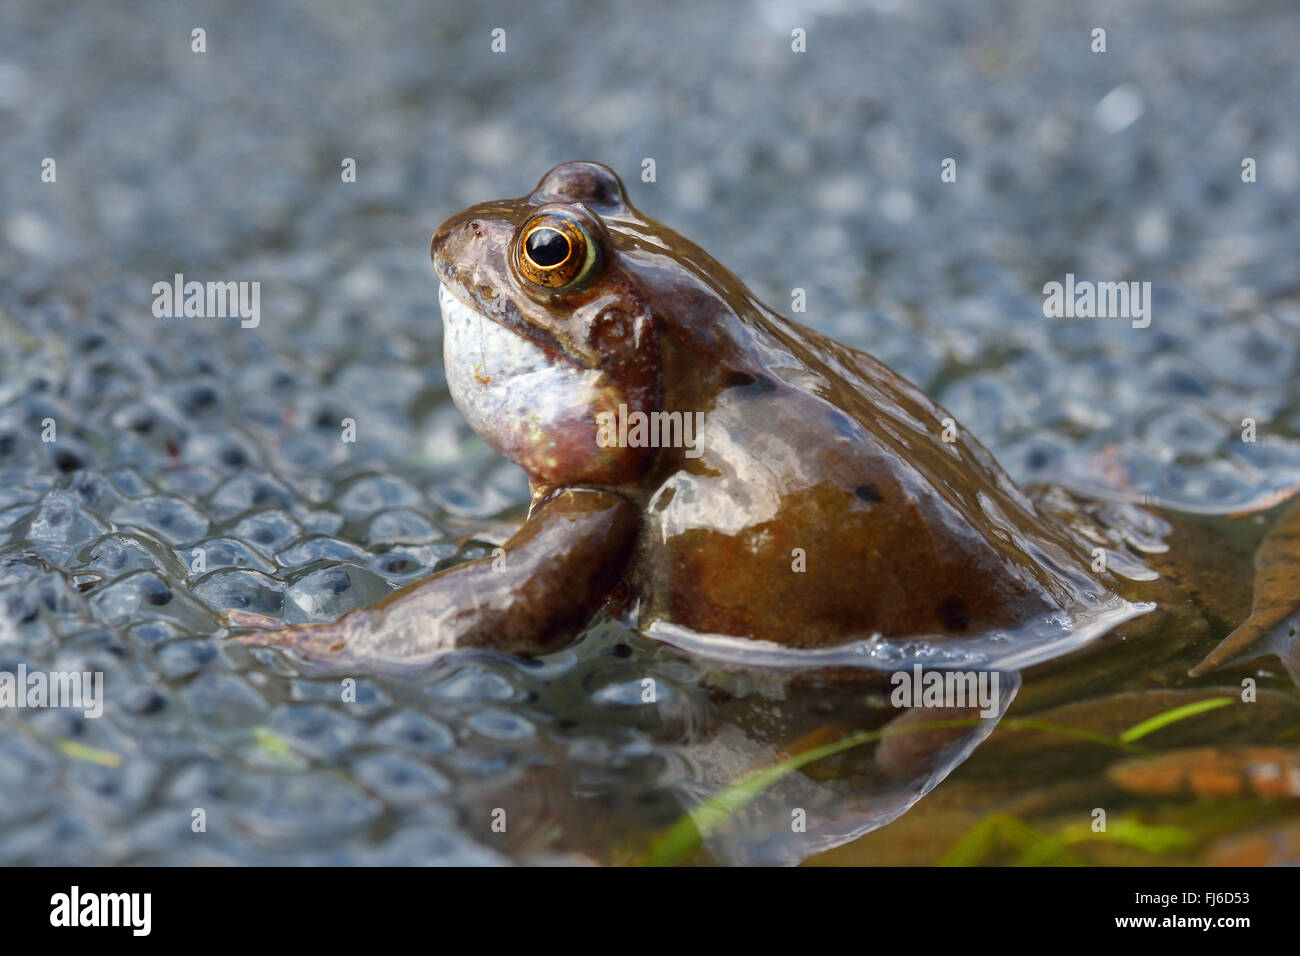 common frog, grass frog (Rana temporaria), sitting in water with eggs, Austria, Burgenland, Neusiedler See National Park Stock Photo